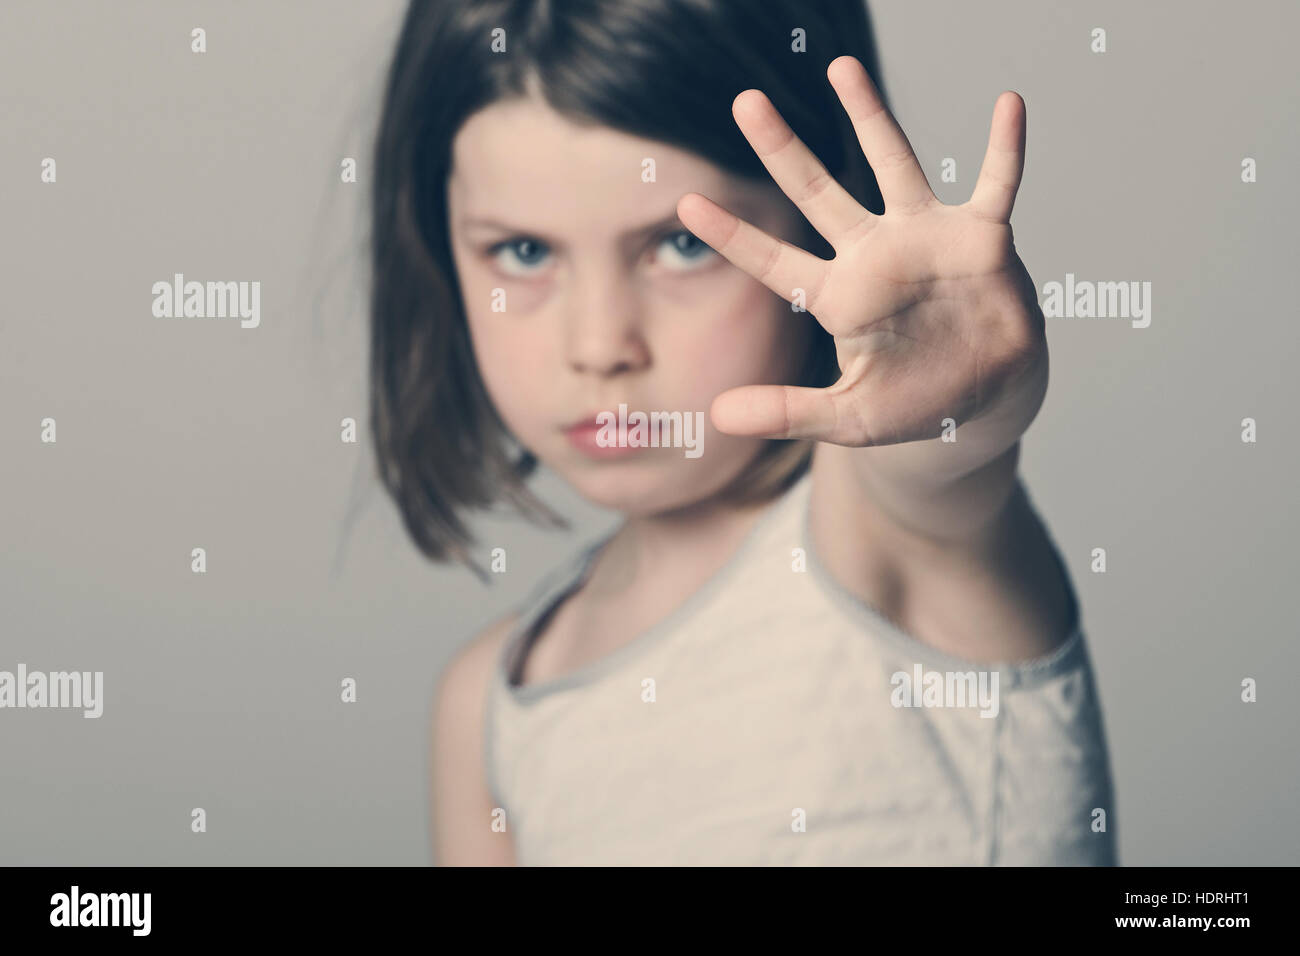 Powerful shot of a child with her hand up Stock Photo